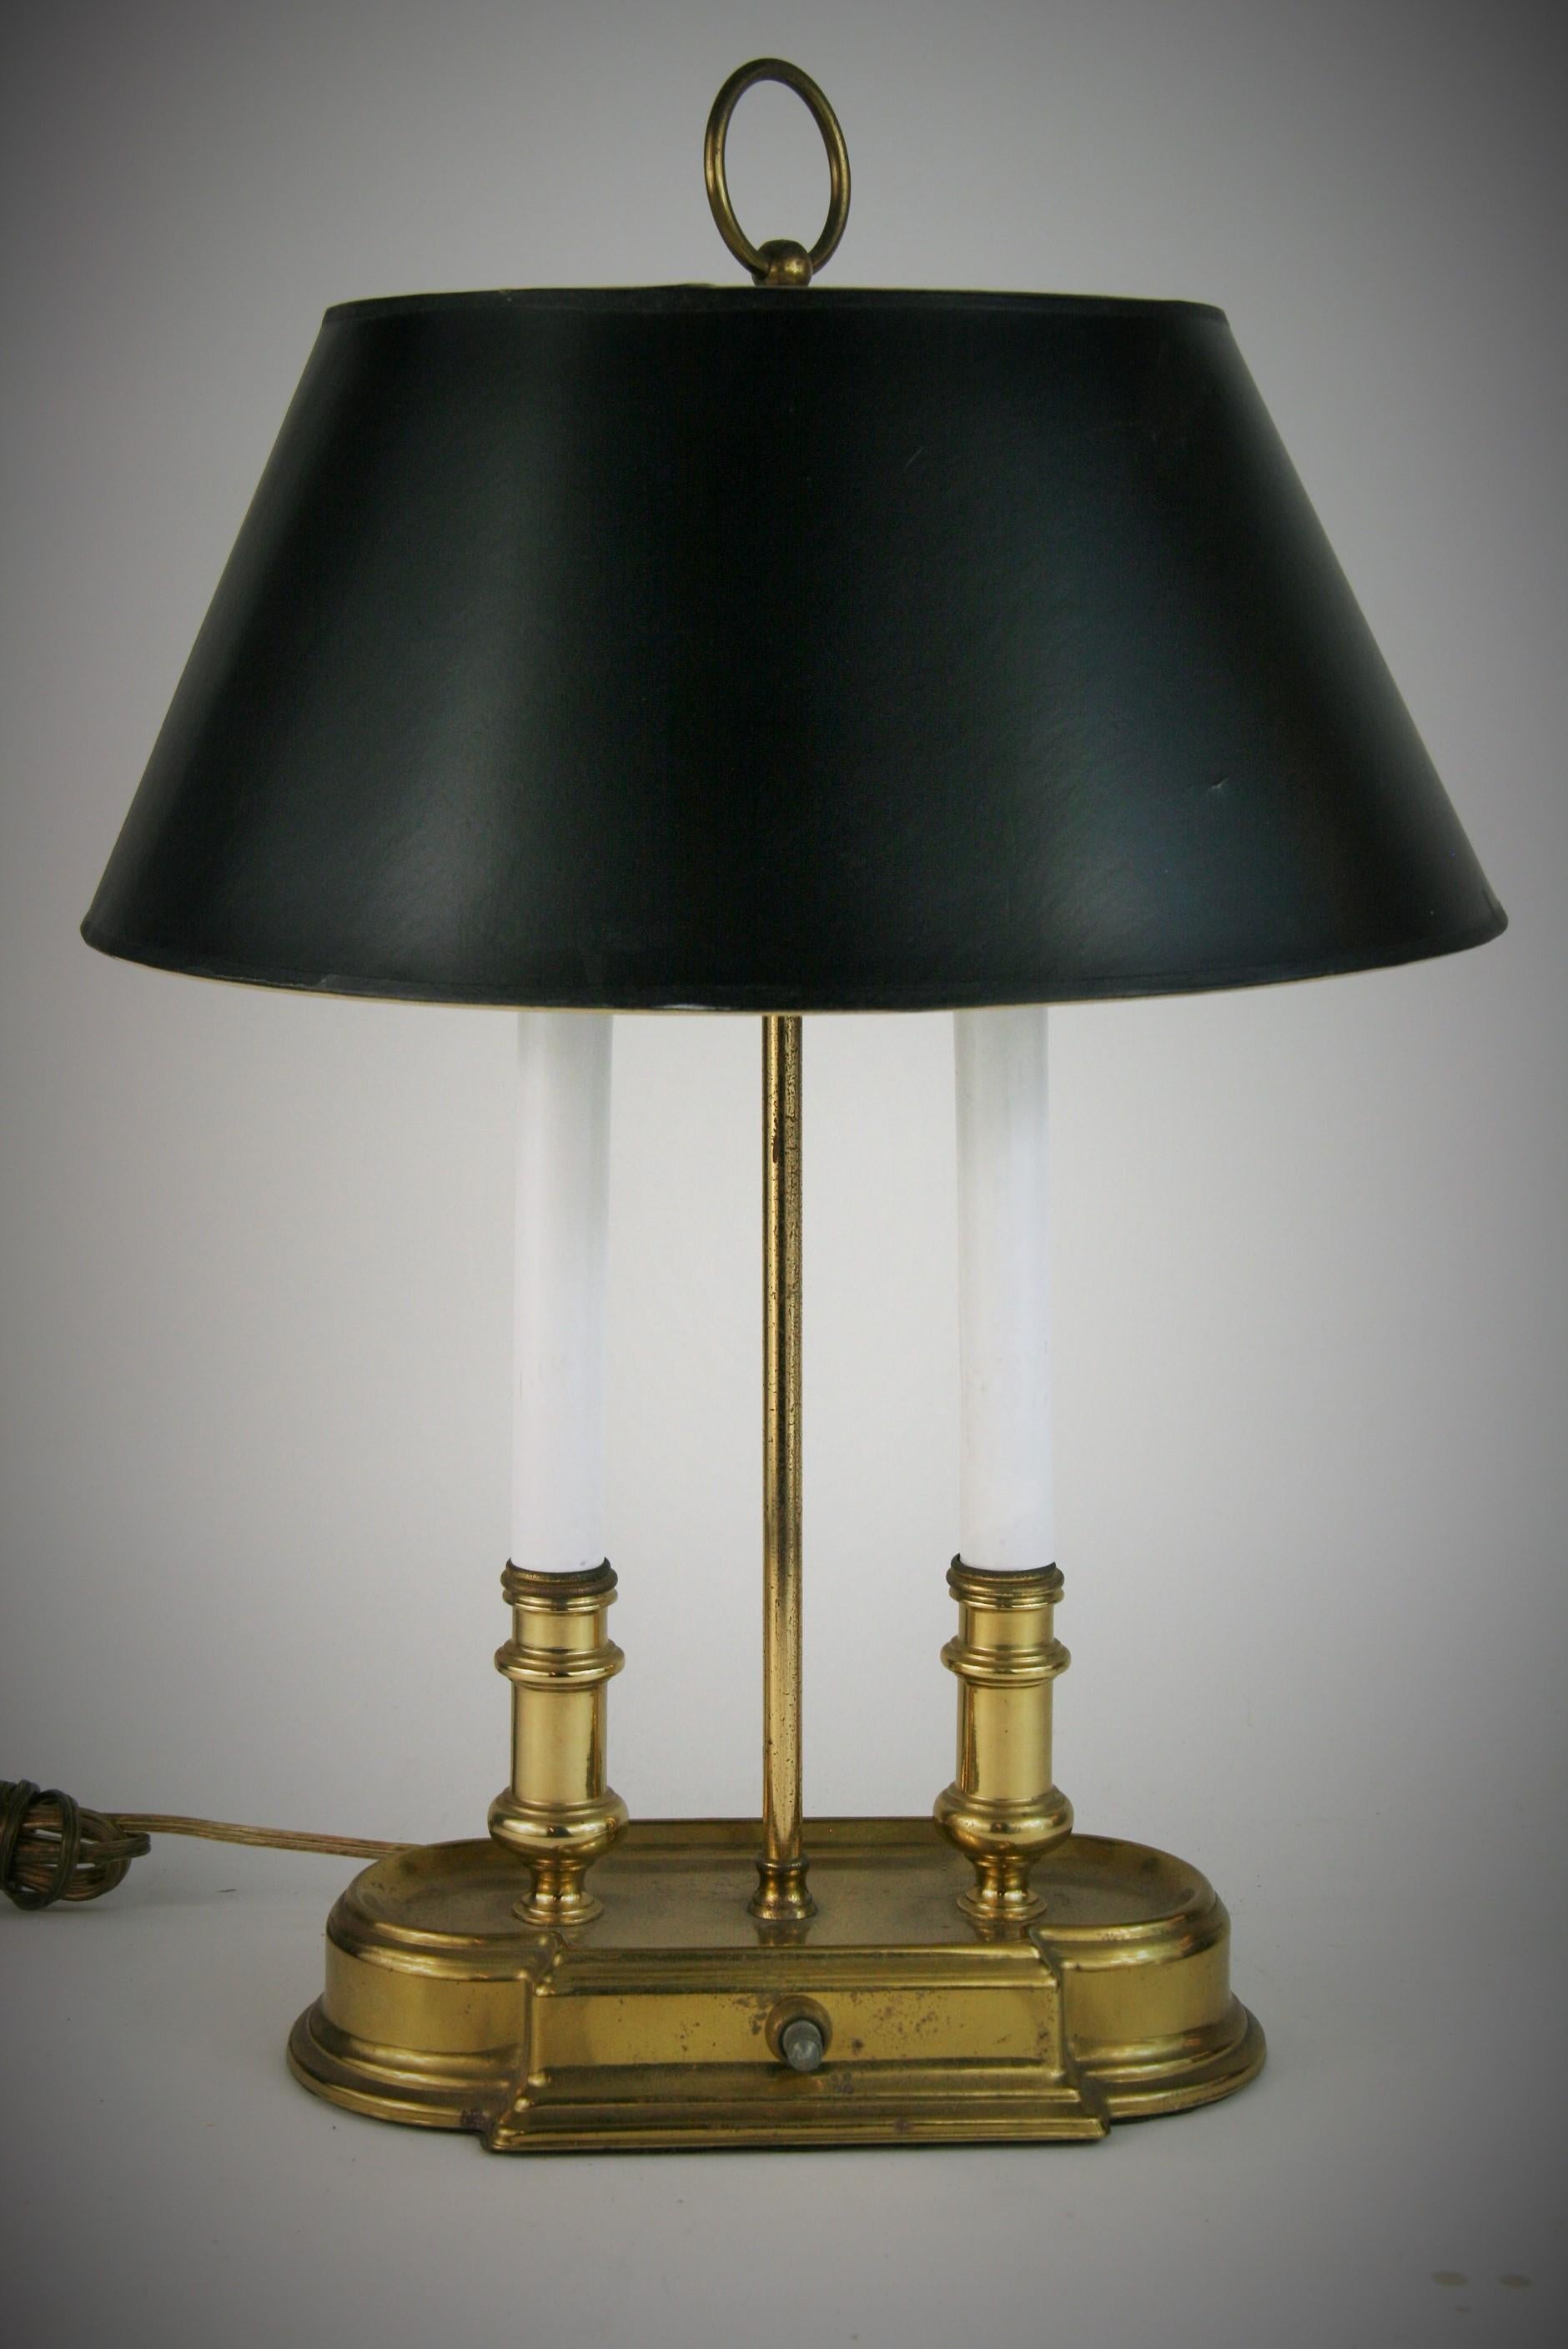 3-436a pair of 2 light brass lamps with black paper shades.
60 watt candelabra base bulbs
Original wiring in working condition
13